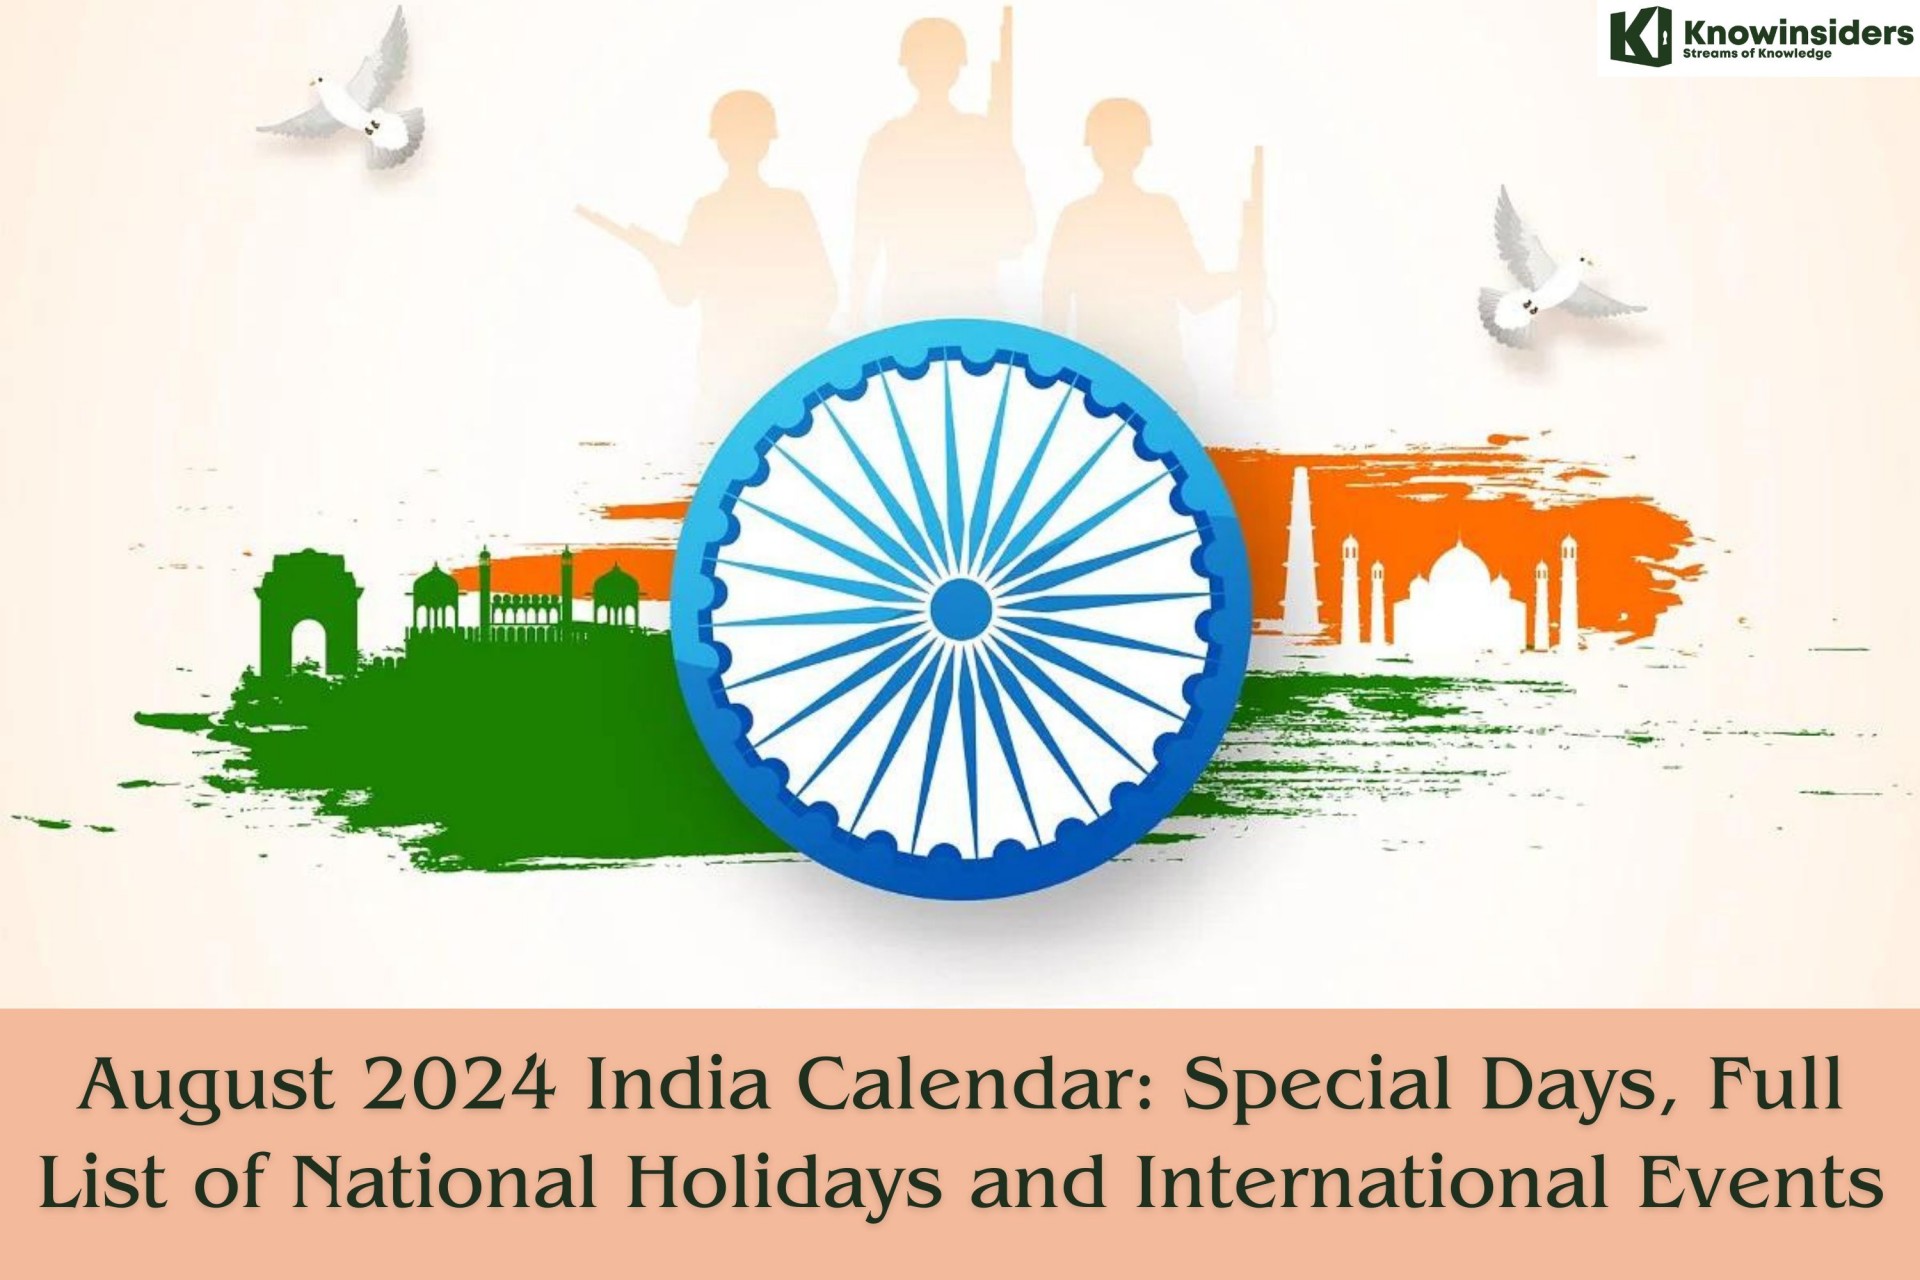 August 2024 India Calendar: Special Days, Full List of National Holidays and International Events